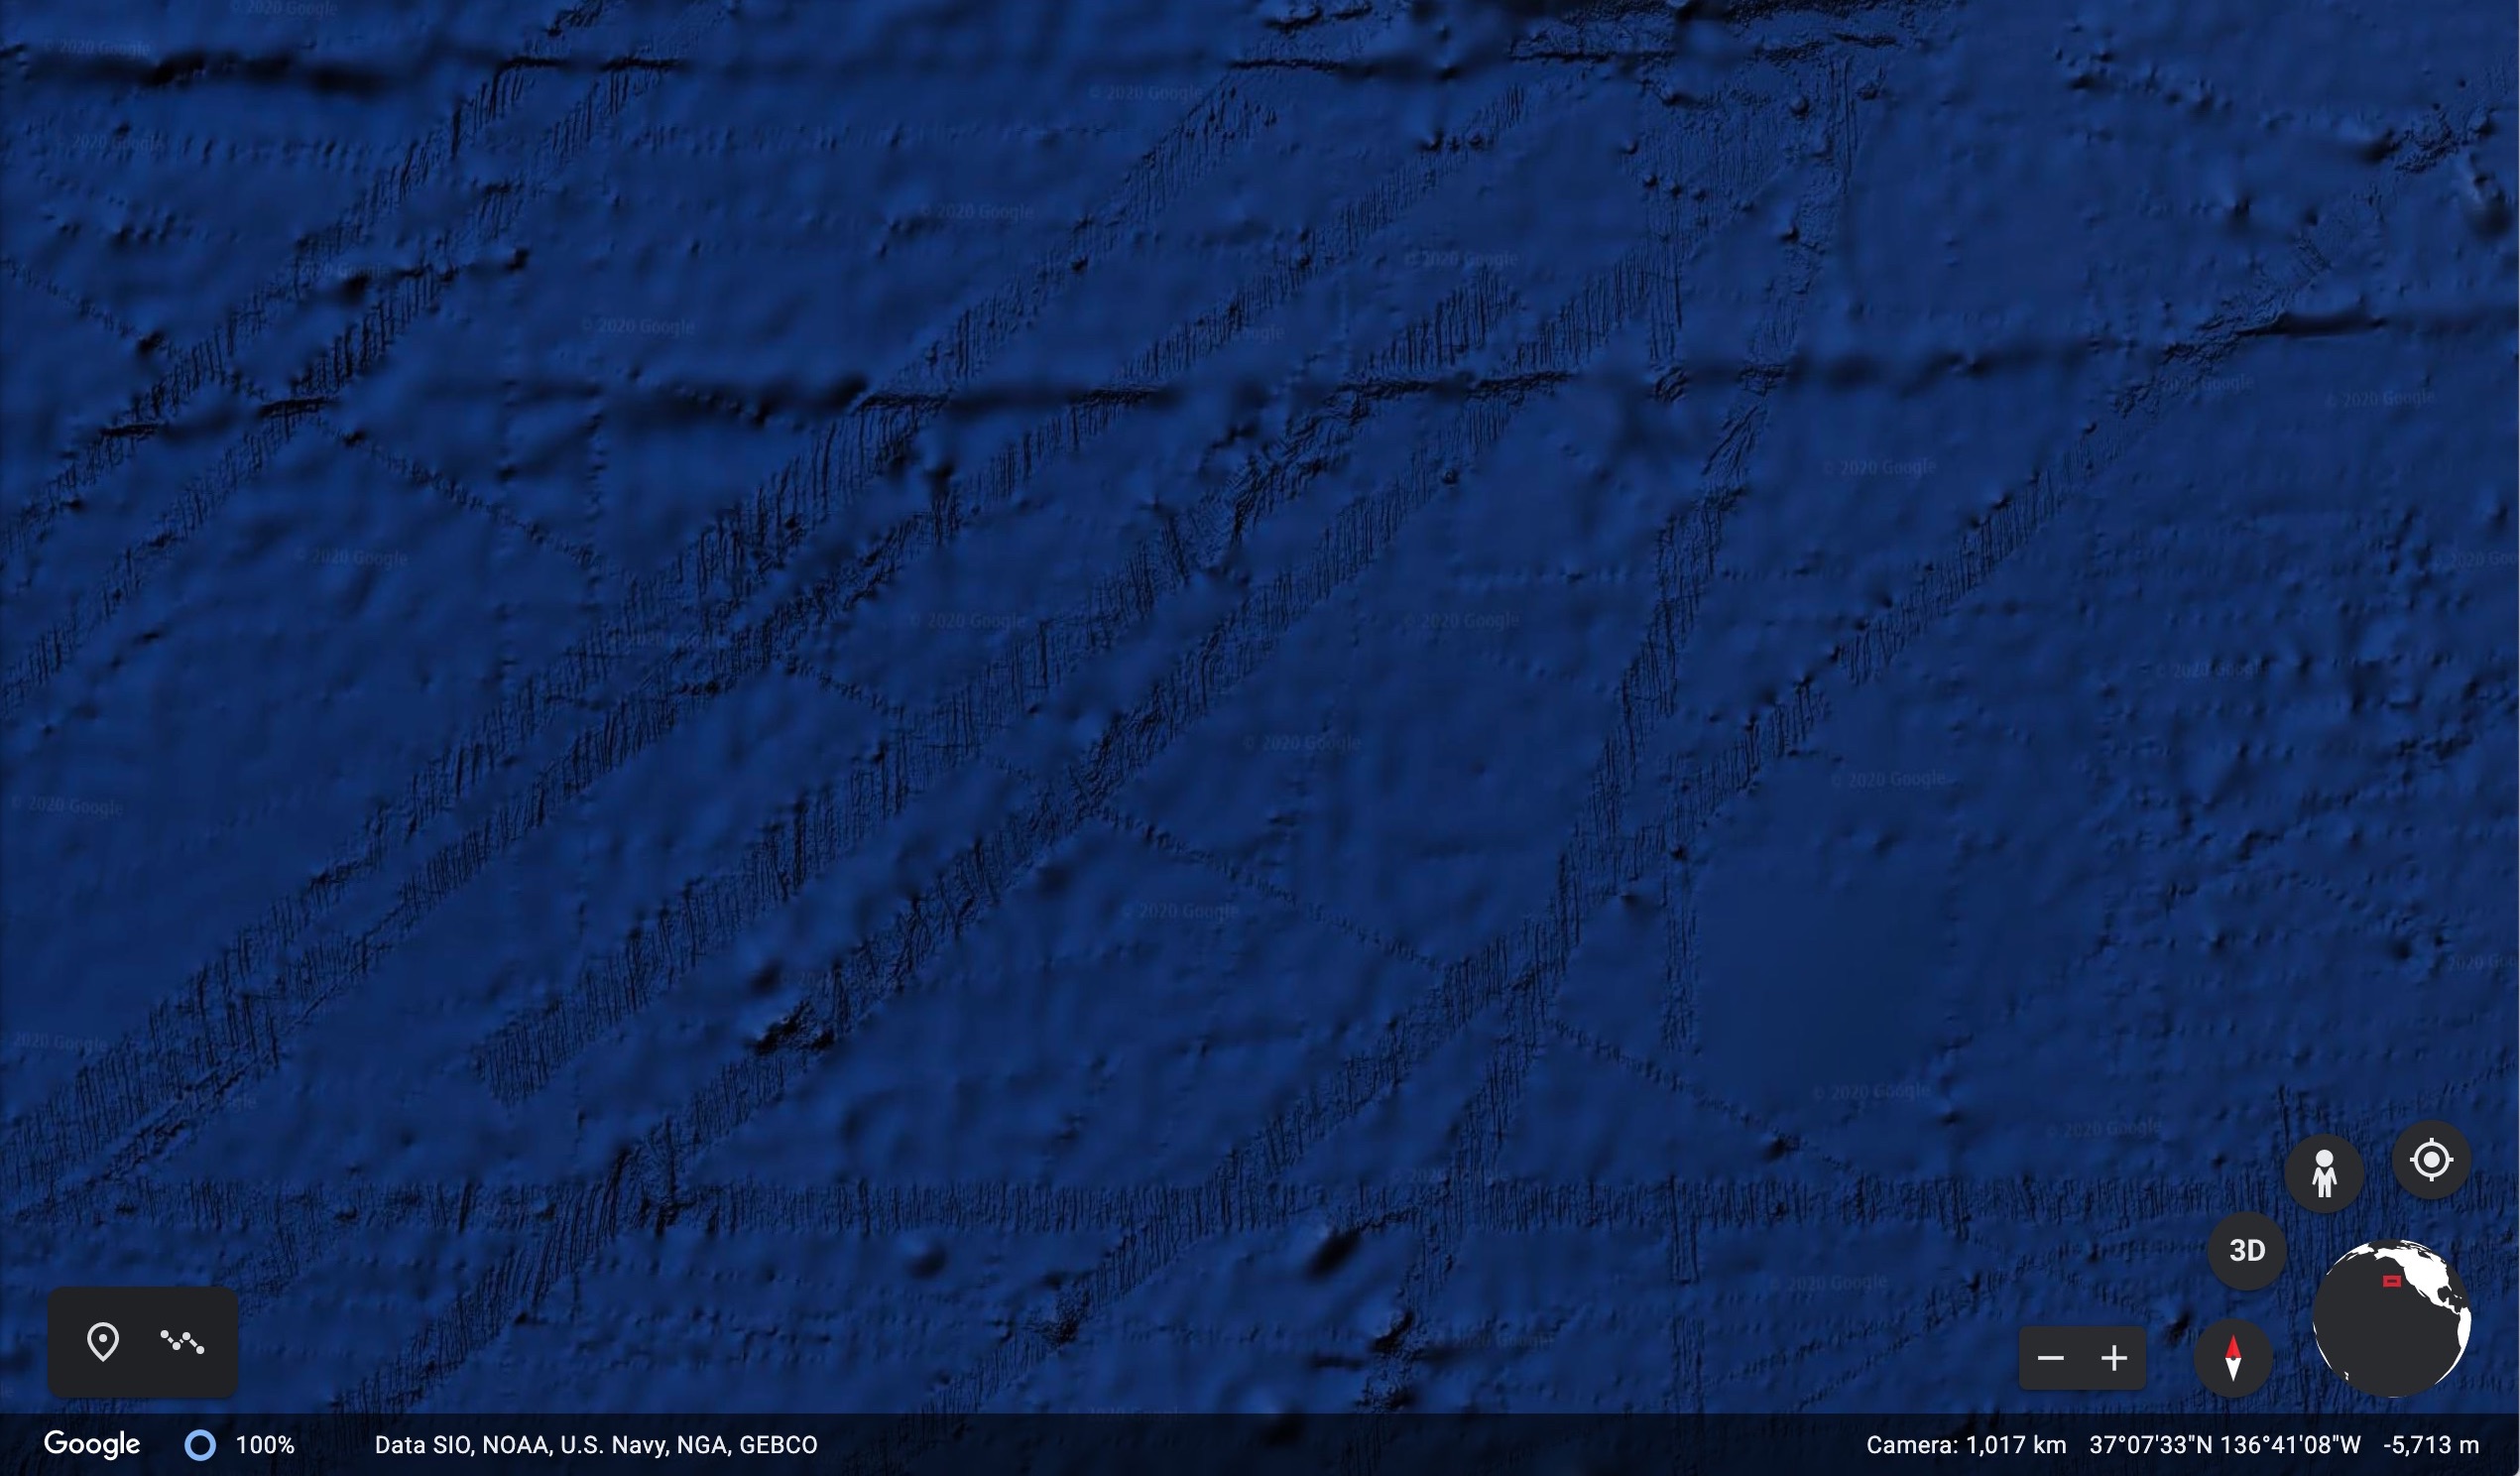 Screenshot from Google Earth that shows anomalous bands on the ocean floor